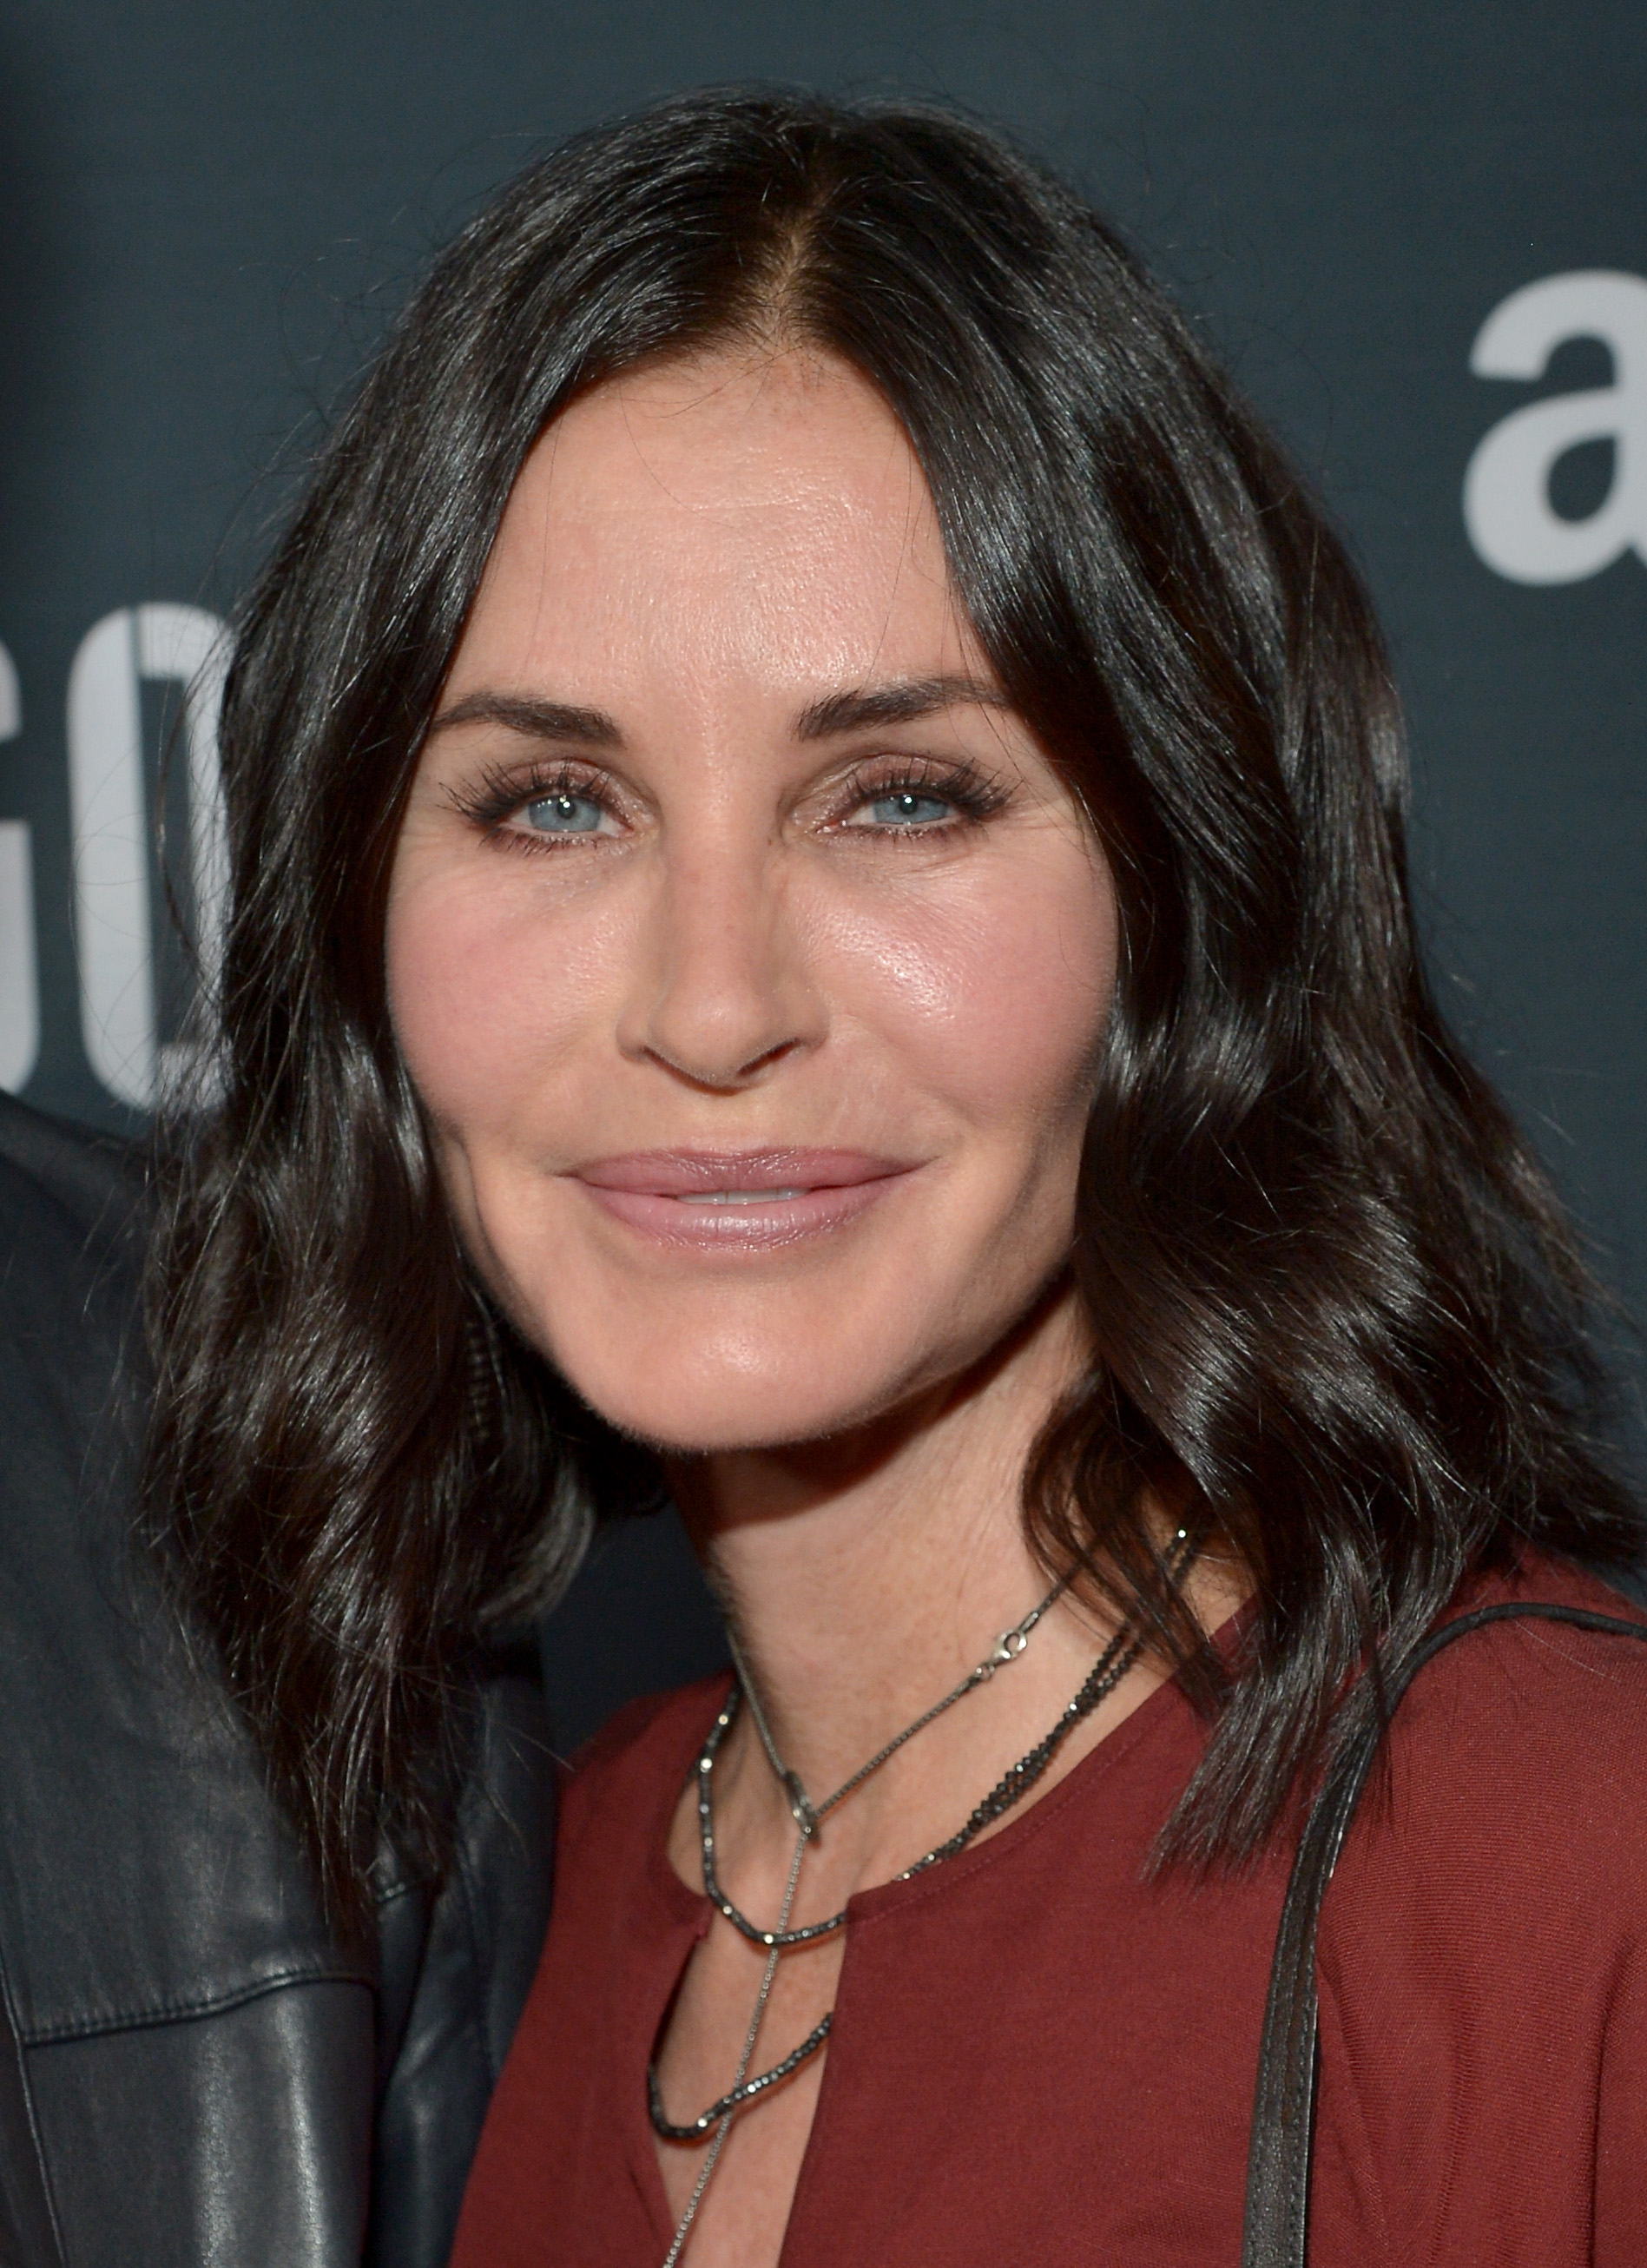 Courteney Cox at the premiere screening of "Hand Of God" on August 19, 2015, in Los Angeles, California. | Source: Getty Images